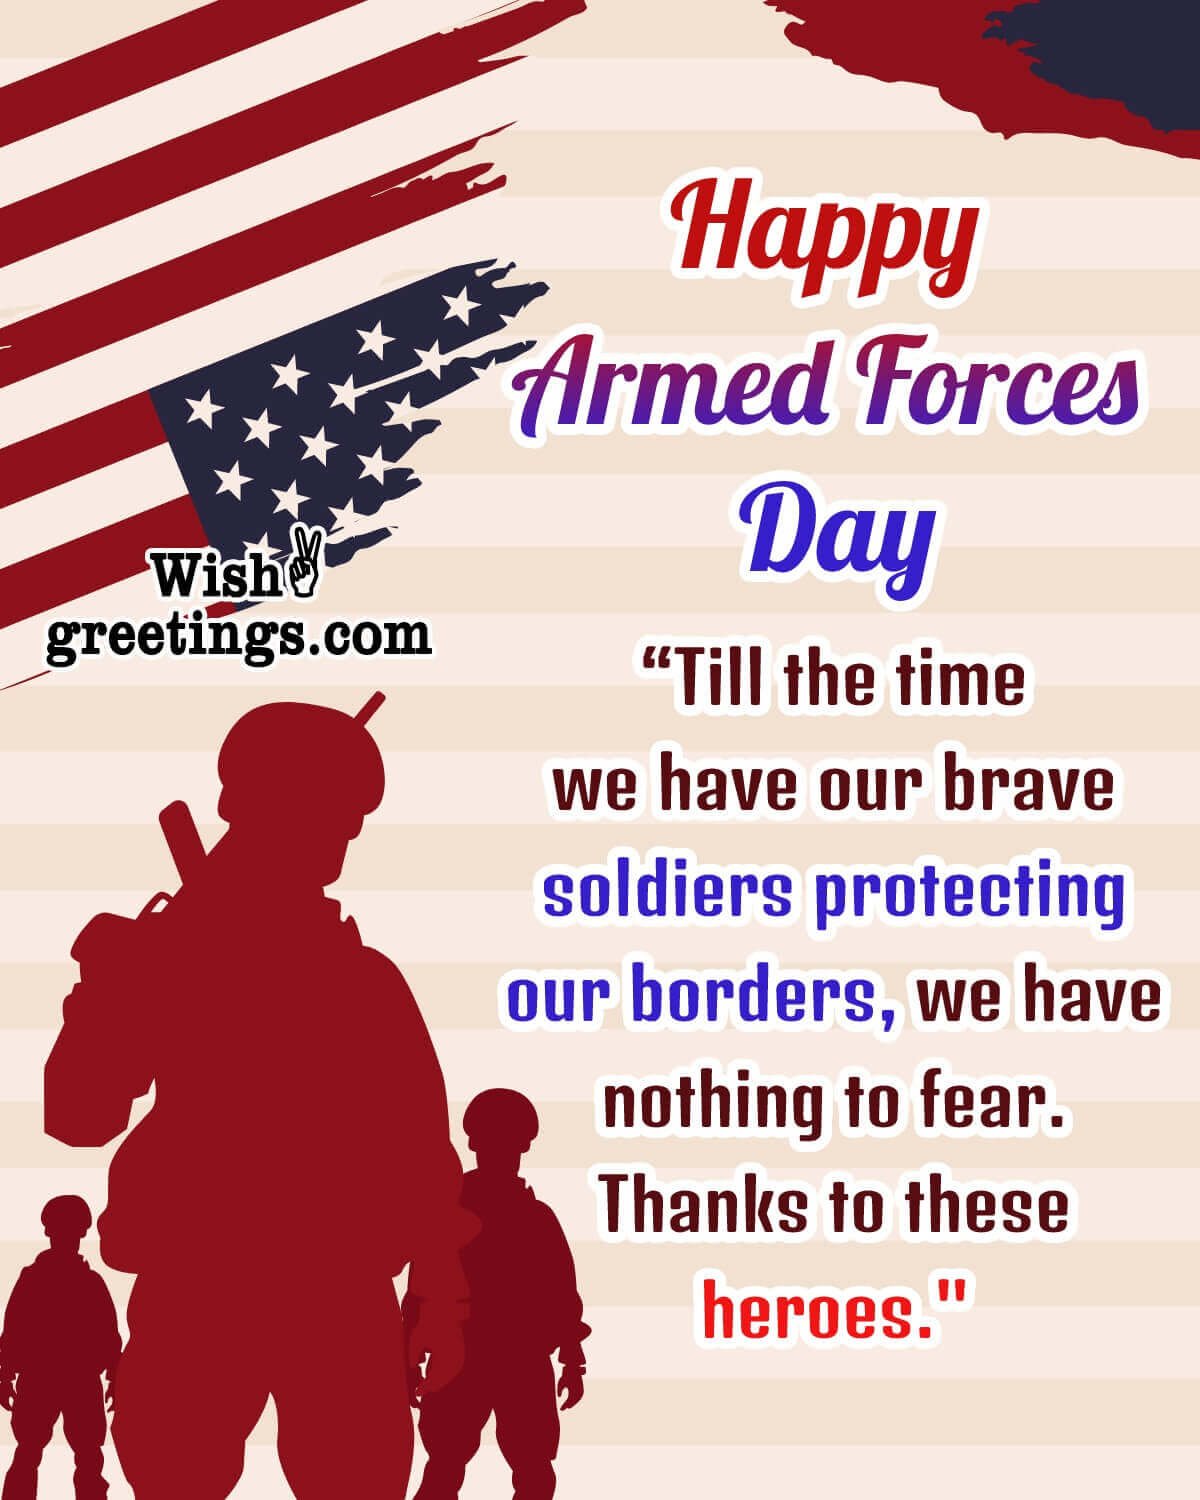 Armed Forces Day Message Photo